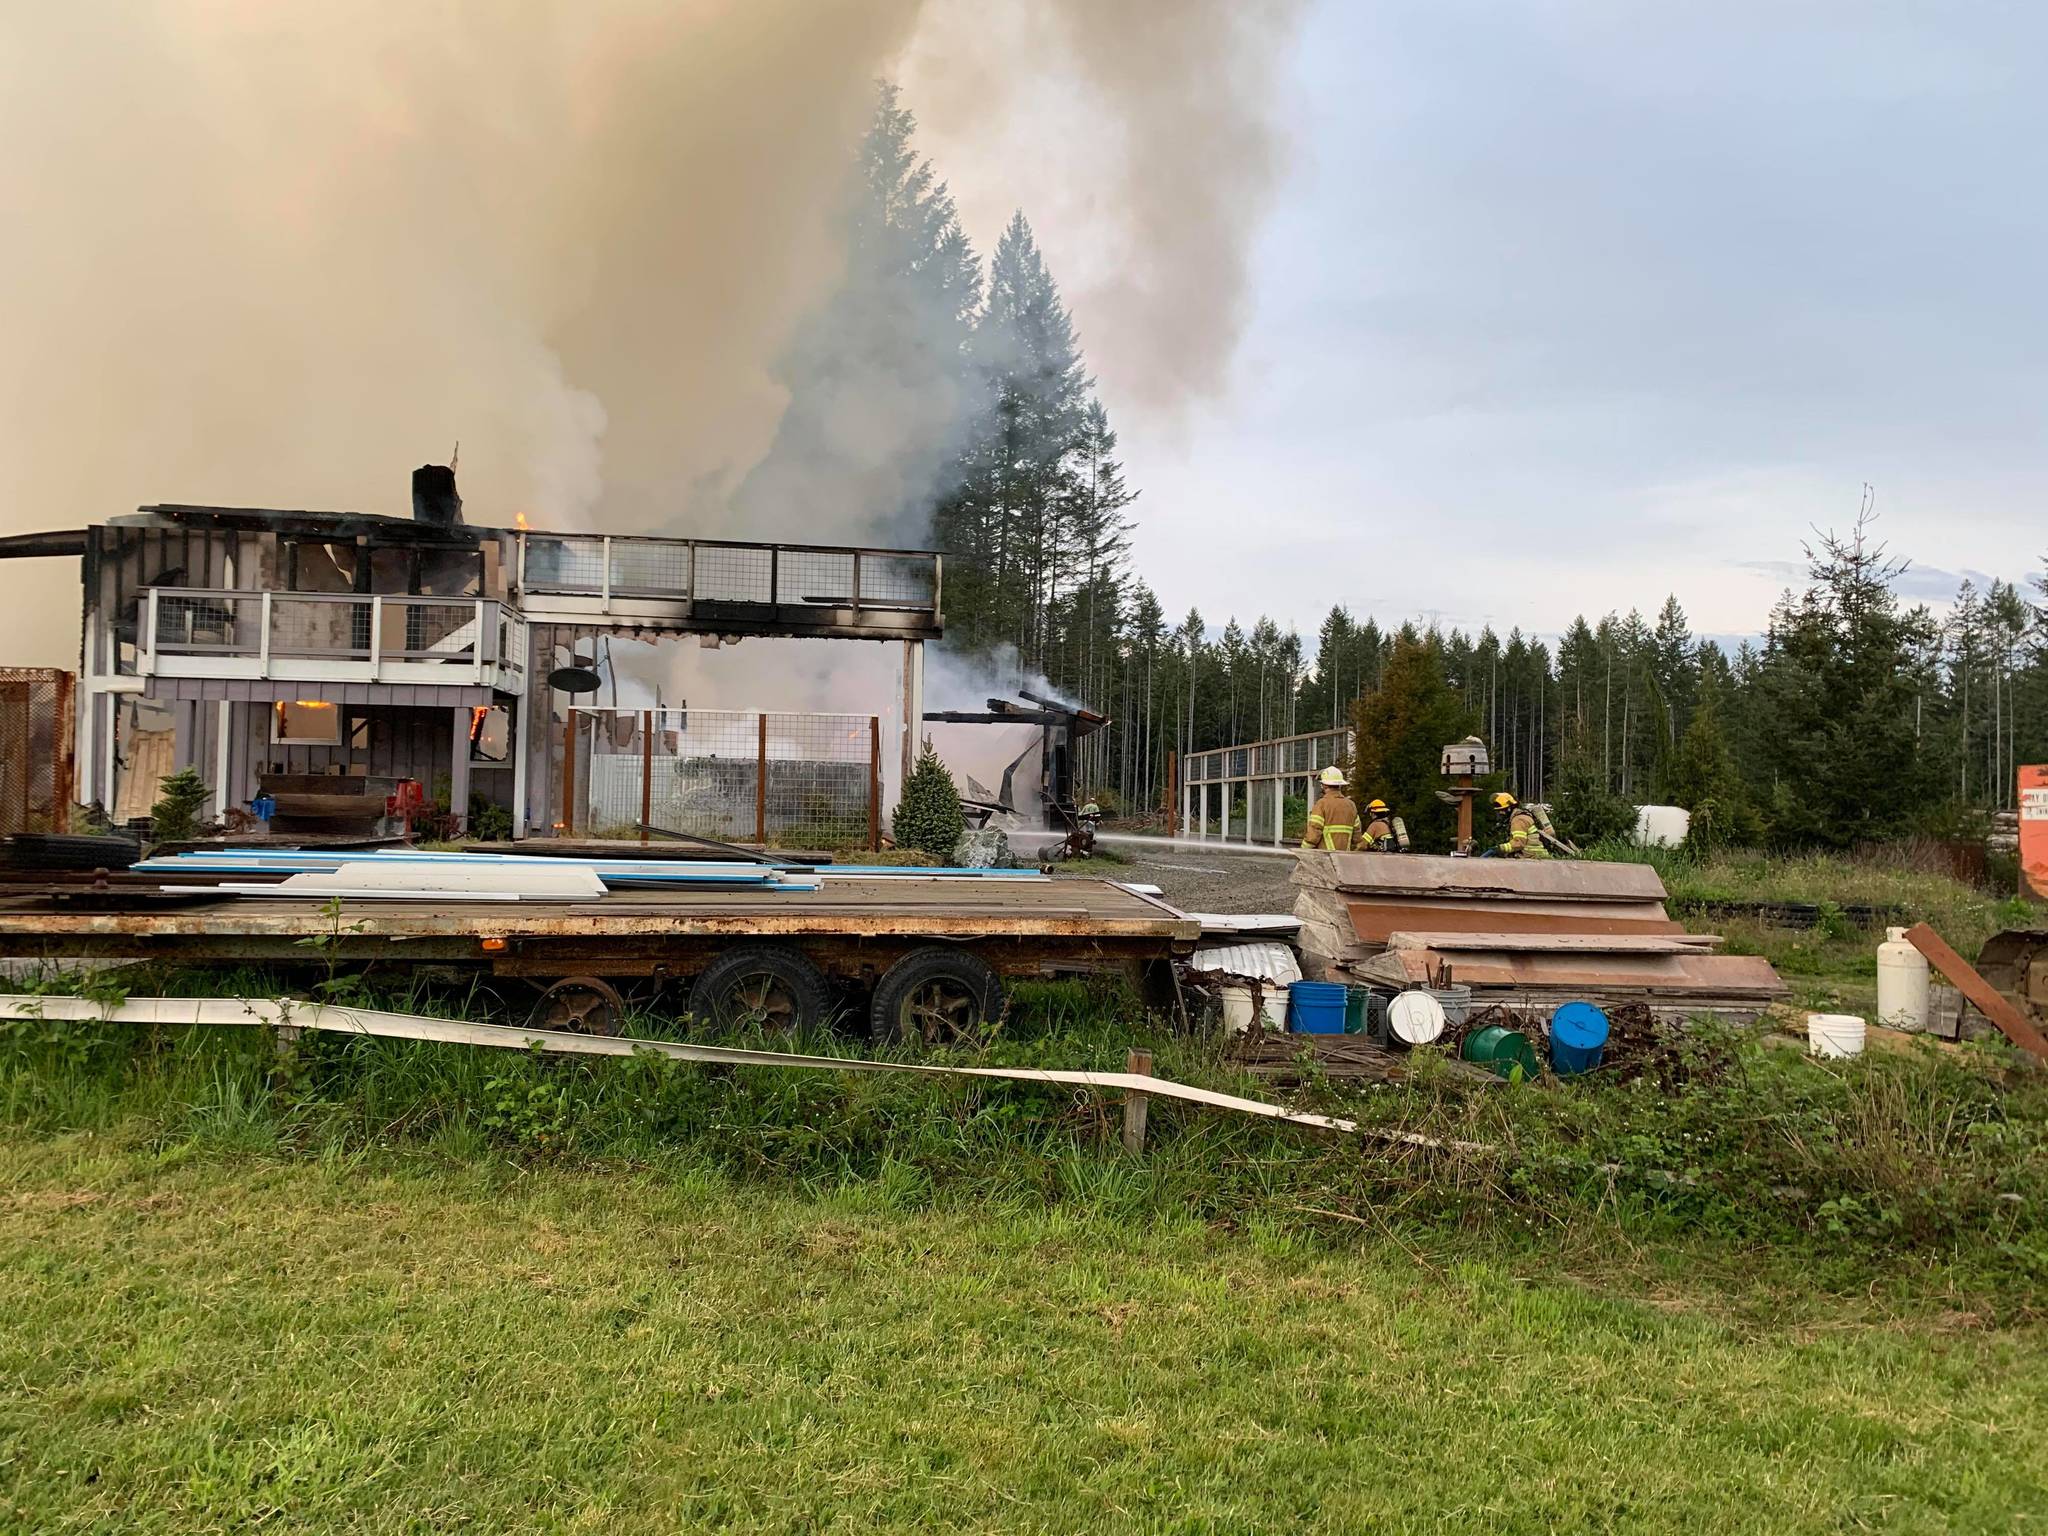 South Whidbey Fire/EMS responded around 7:29 p.m. Wednesday evening to a structure fire near Venturi Way. (Photo by Heather Mayhugh)